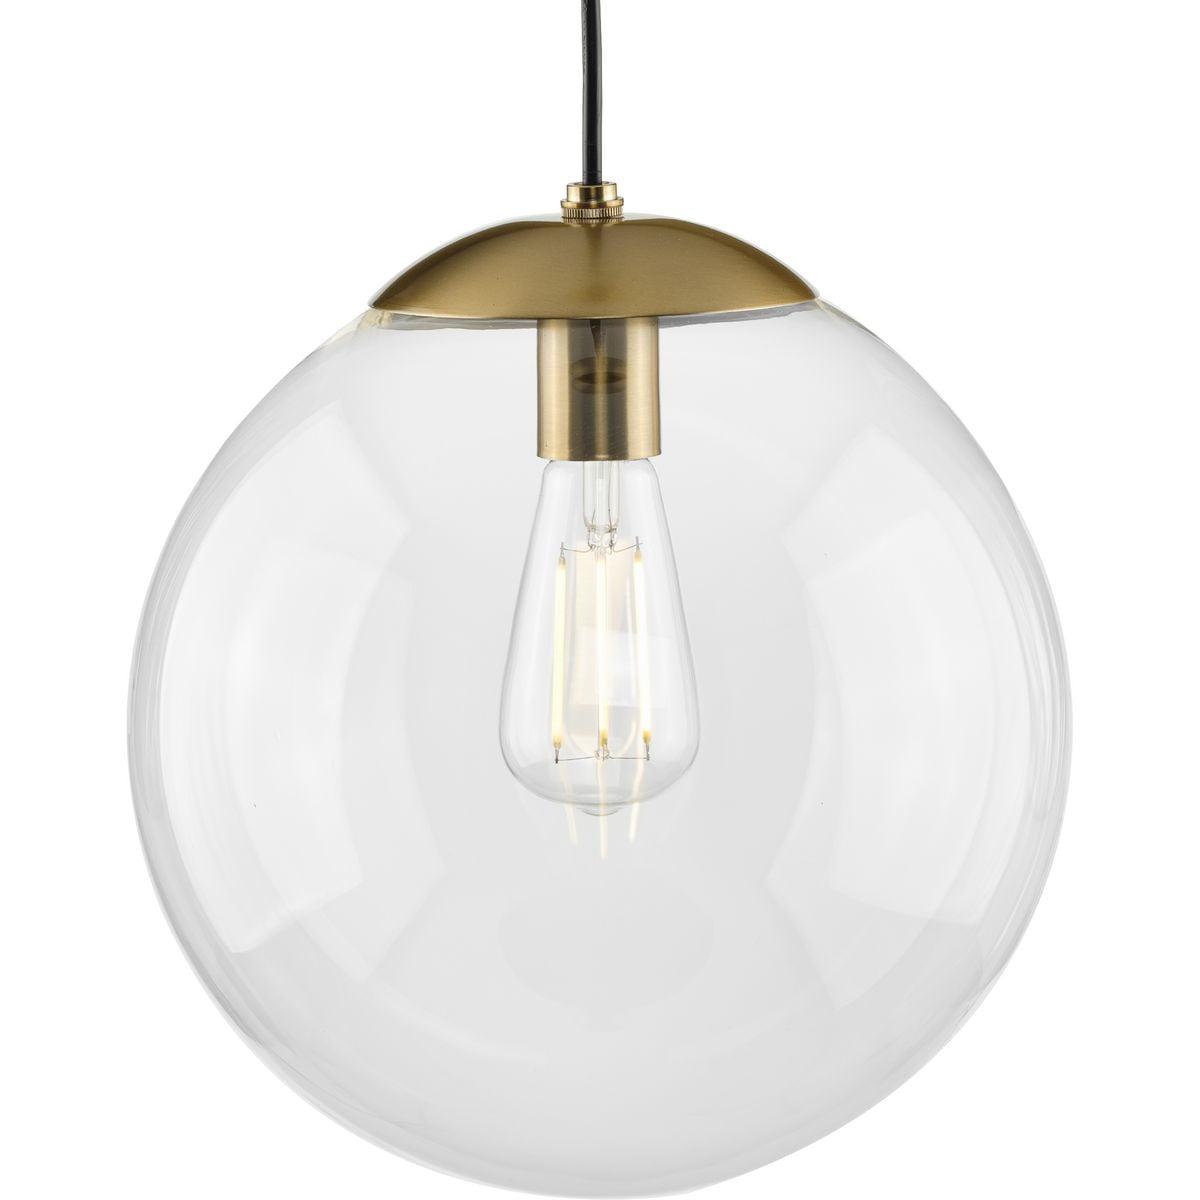 Atwell 12-inch Brushed Bronze Globe Pendant with Clear Glass Shade